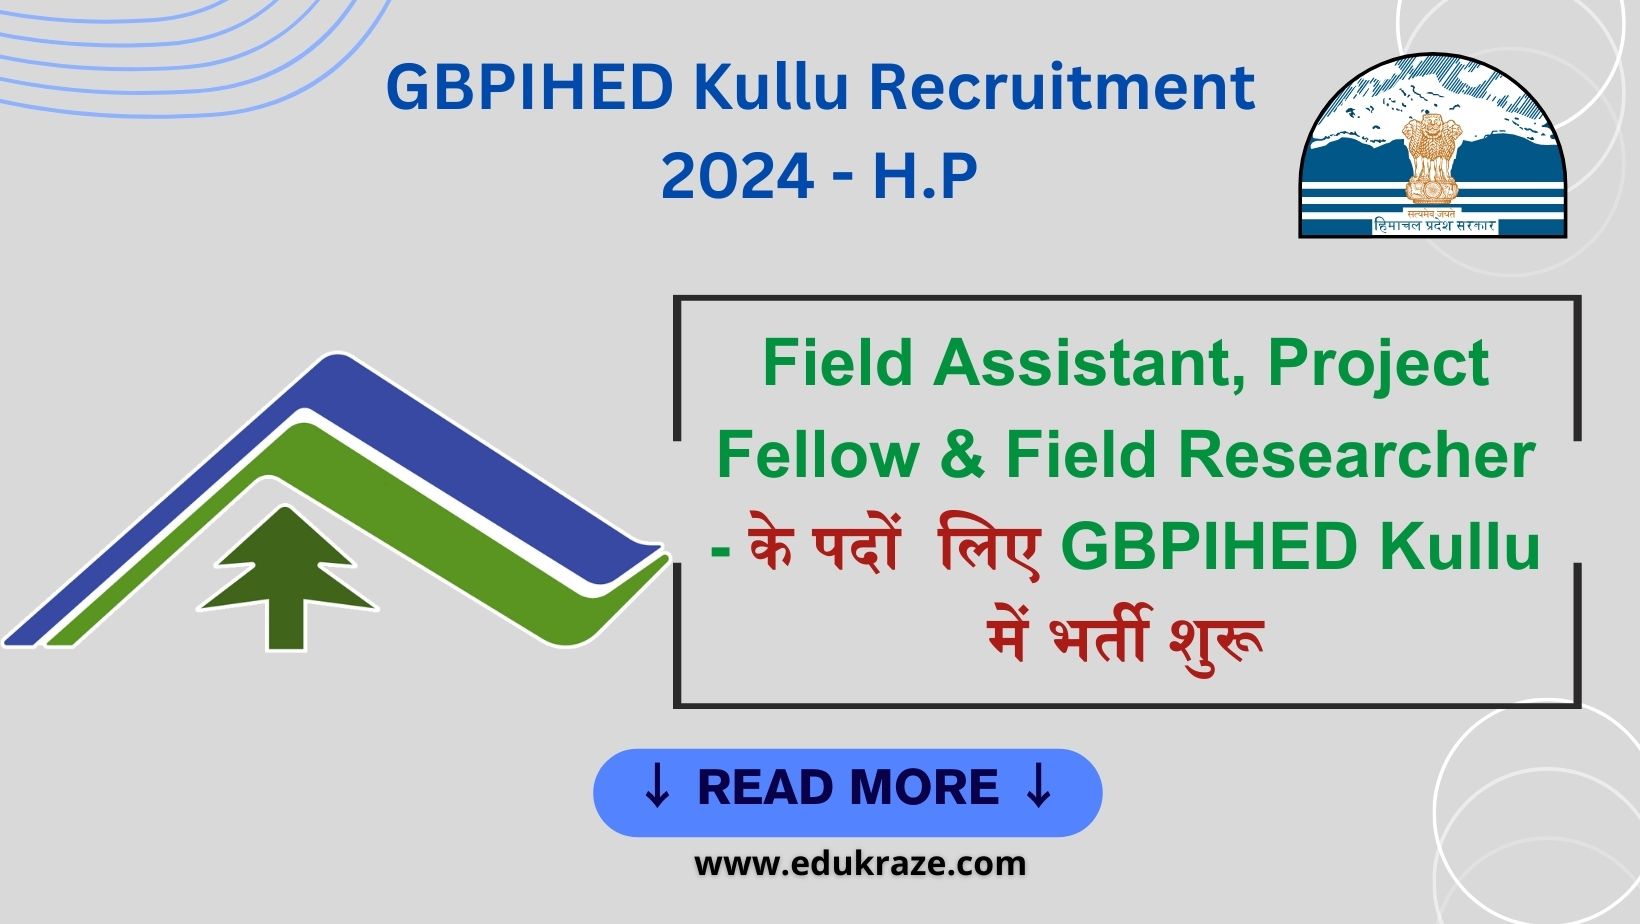 Field Assistant, Project Fellow & Field Researcher Posts out at GBPIHED Kullu